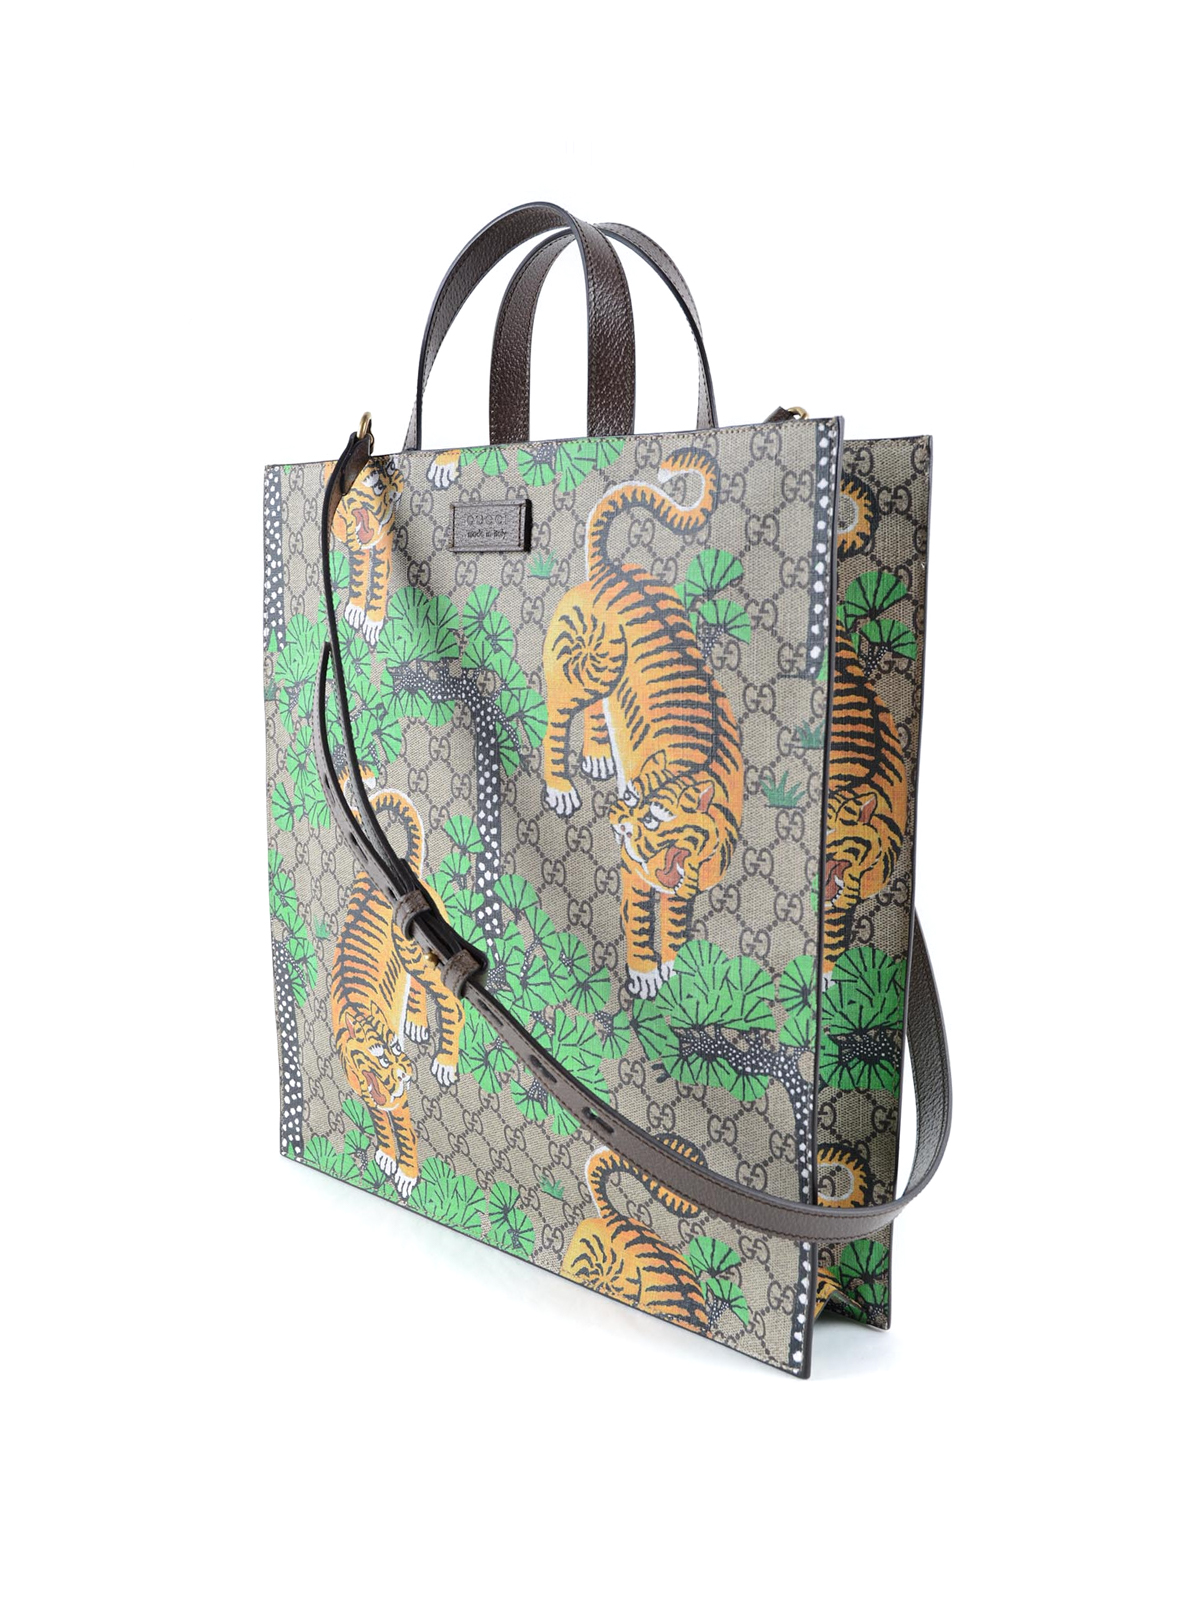 Gucci Bengal print GG canvas tote by Gucci - totes bags | Shop online at www.paulmartinsmith.com